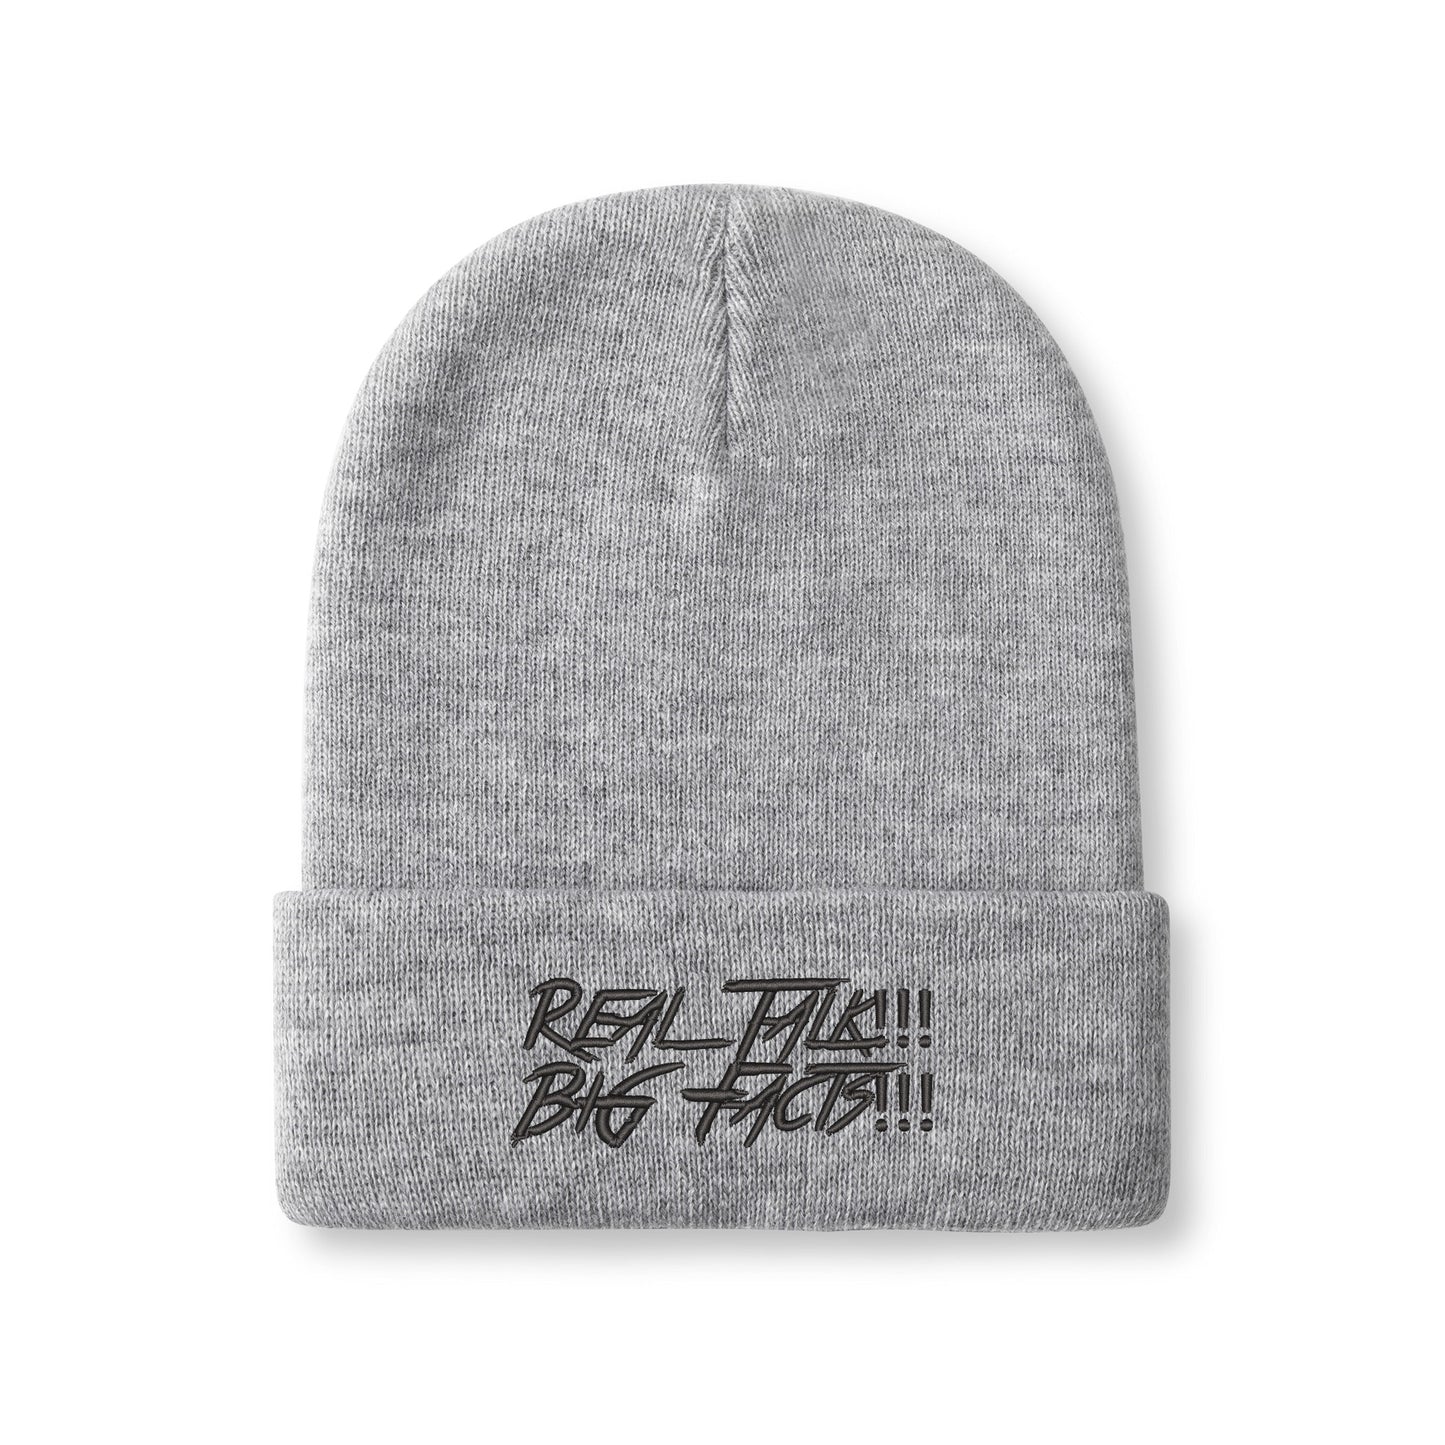 REAL TALK!!! BiG FACTS Embroidered Knitted Hats